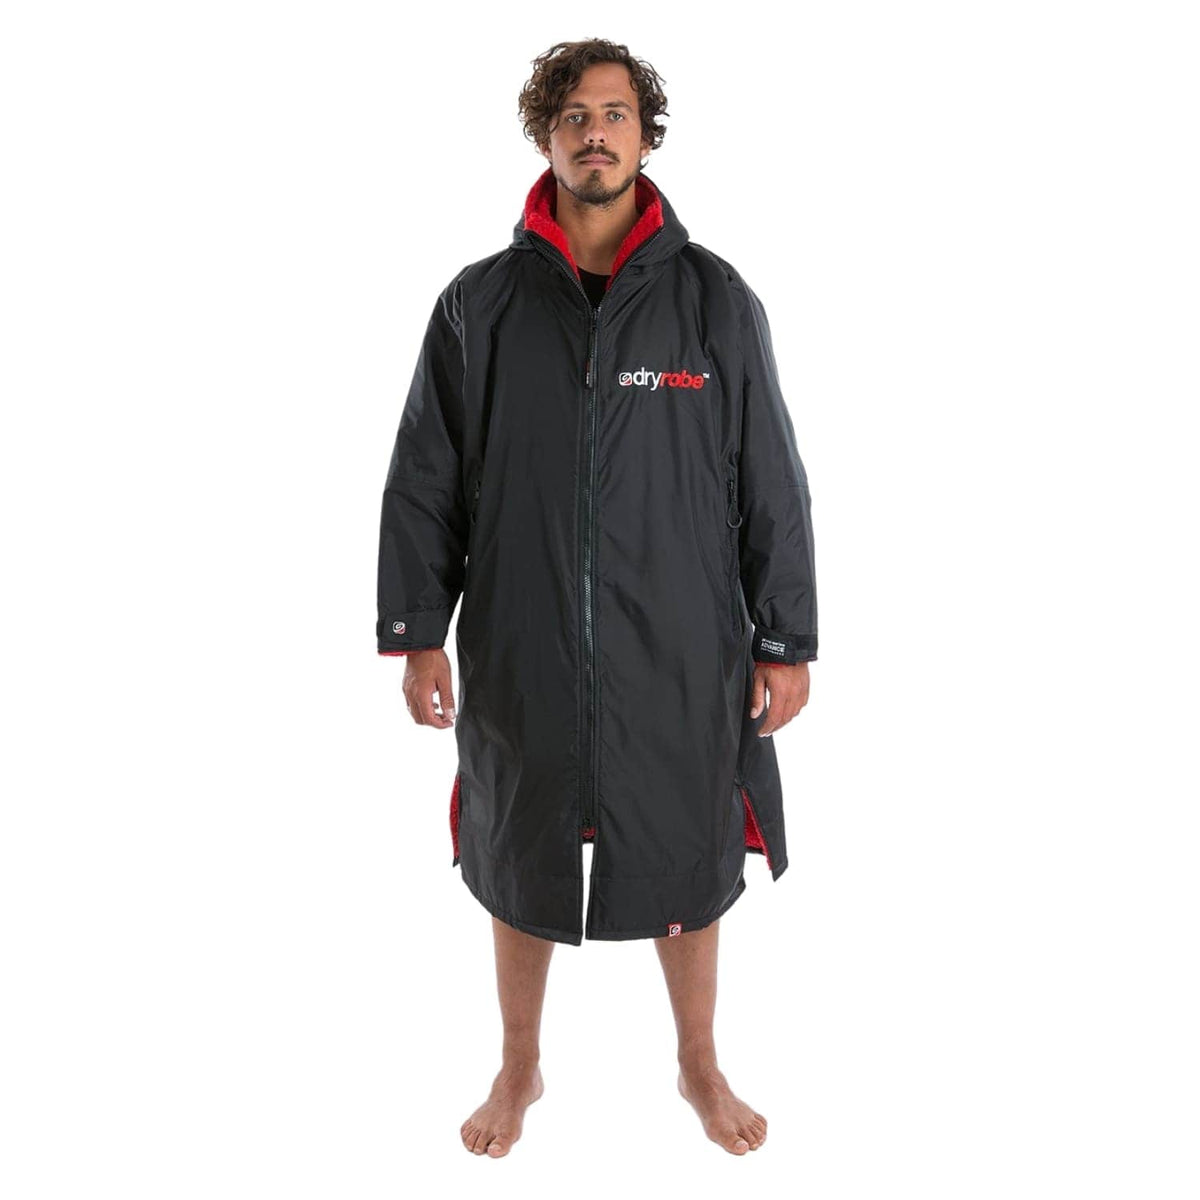 Dryrobe Advance Long Sleeve Drying &amp; Changing Robe - Black/Red - Changing Robe Poncho Towel by Dryrobe